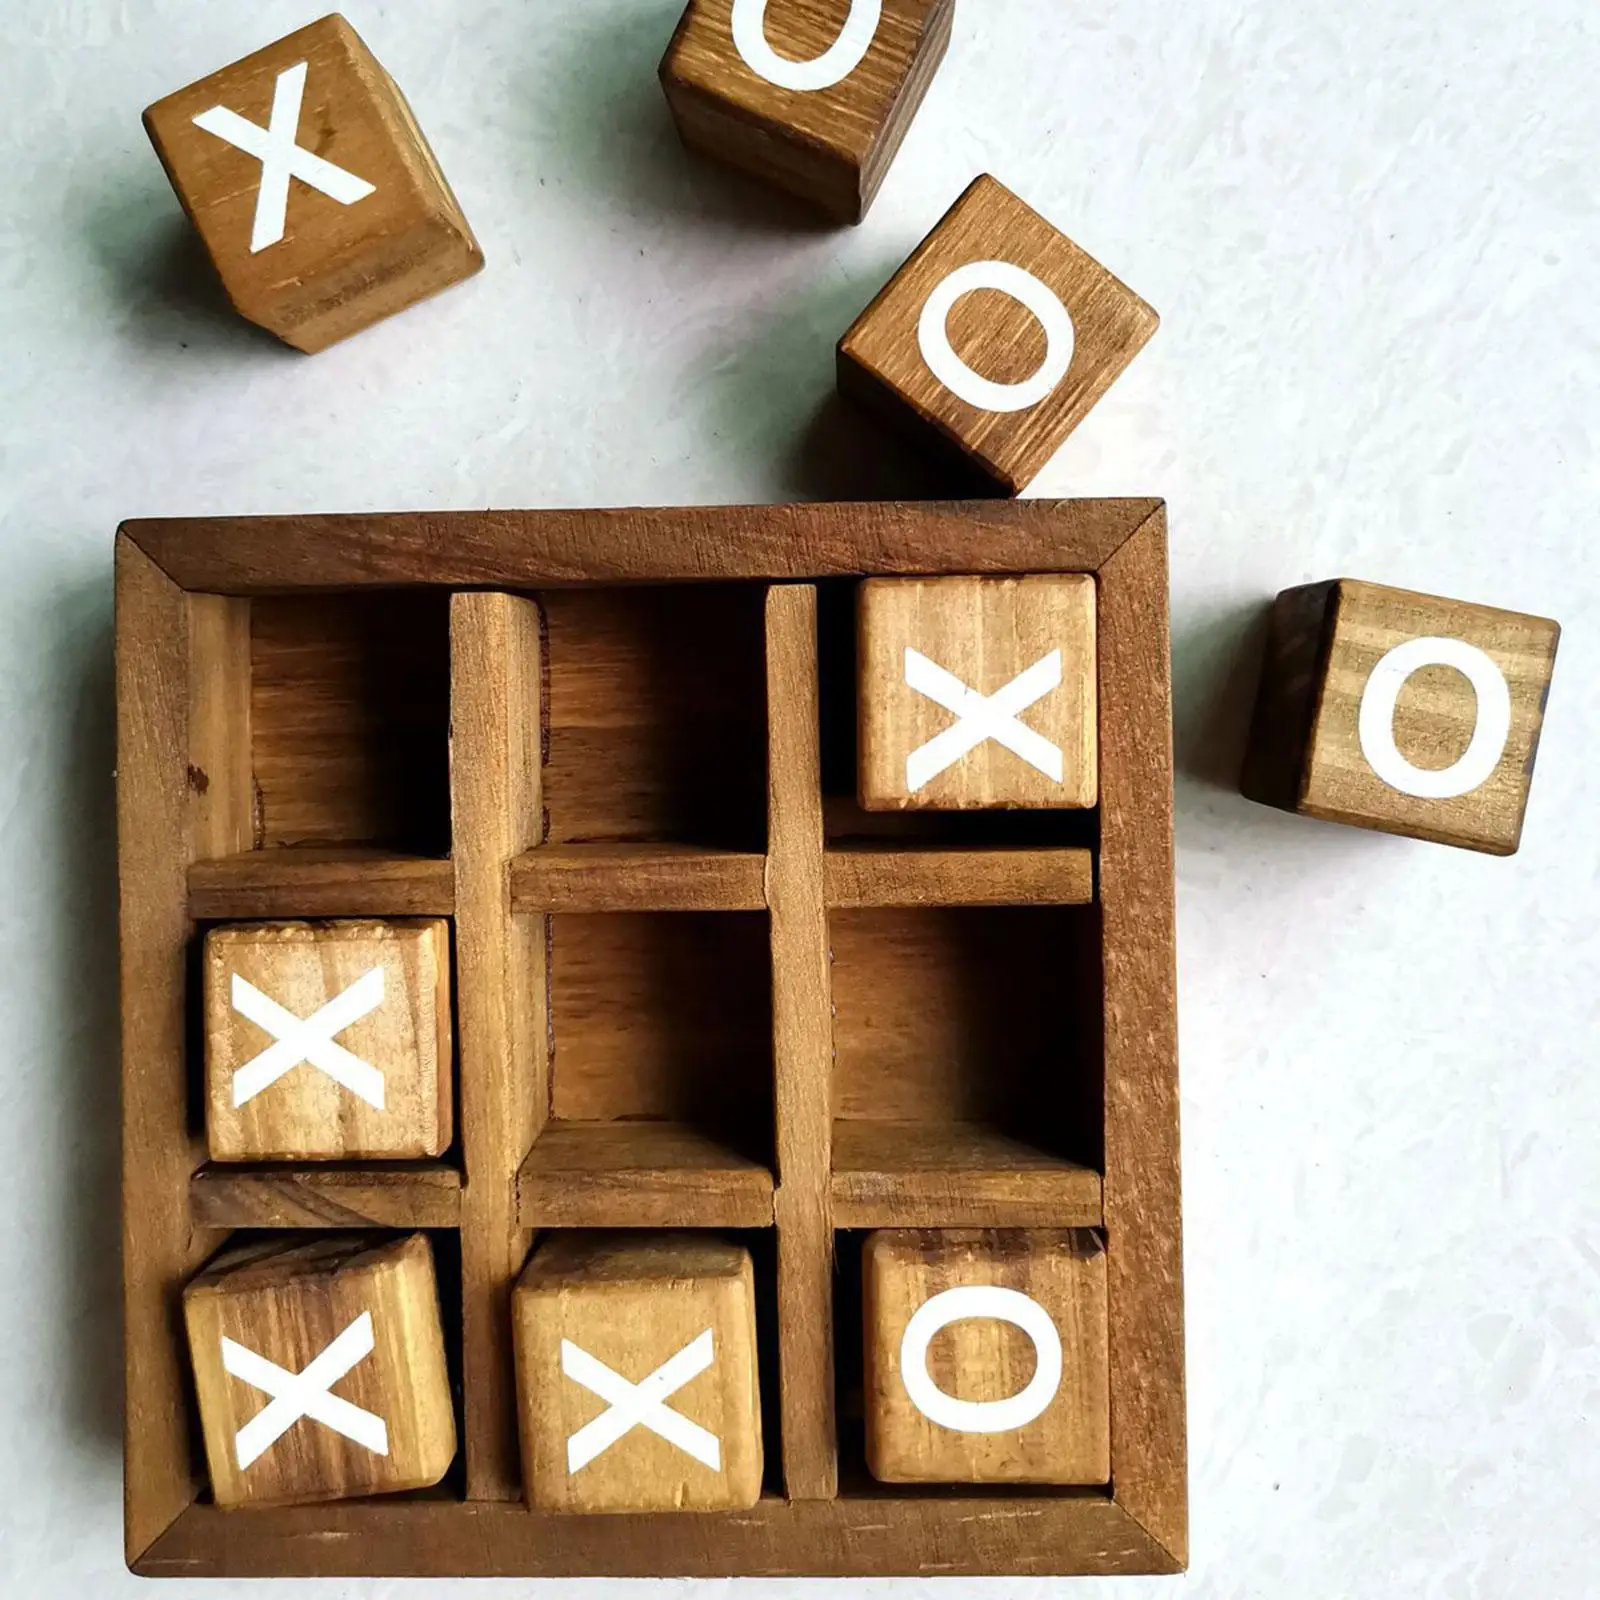 Wooden Tic TAC Toe Game Table Games Party Favor Fun Indoor Brain Teaser Travel for Adults Home Decor